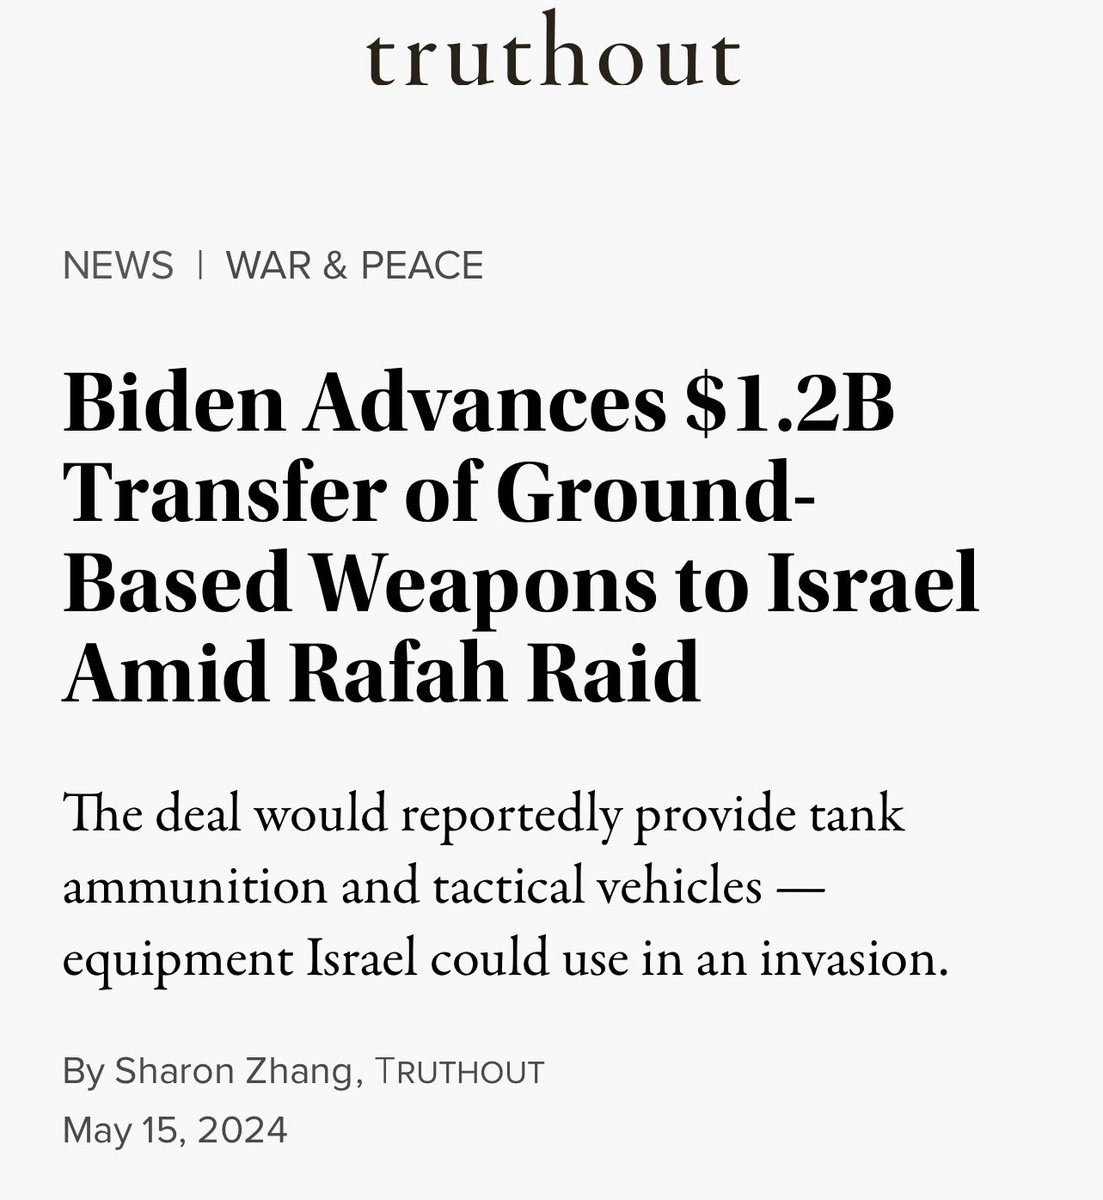 Joe Biden continues to be complicit in this genocide. He has supported and funded Israel this whole time. There has been no policy change.